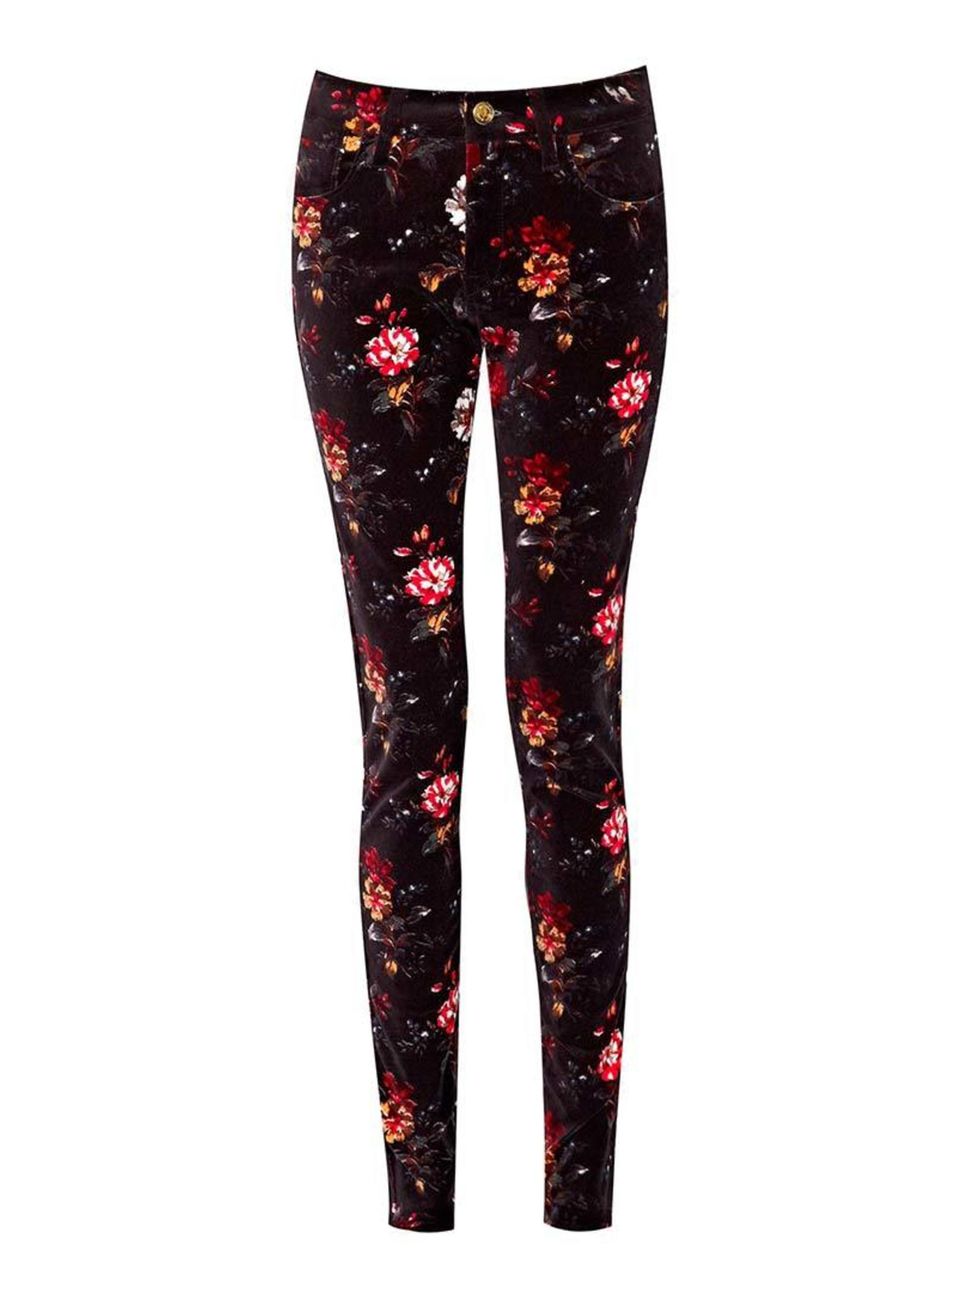 <p><a href="http://www.frenchconnection.com/product/74CPR/Gardini+Floral+Denim+Jeans.htm?search_keywords=floral" target="_blank">French Connection</a> jeans, £80.</p>